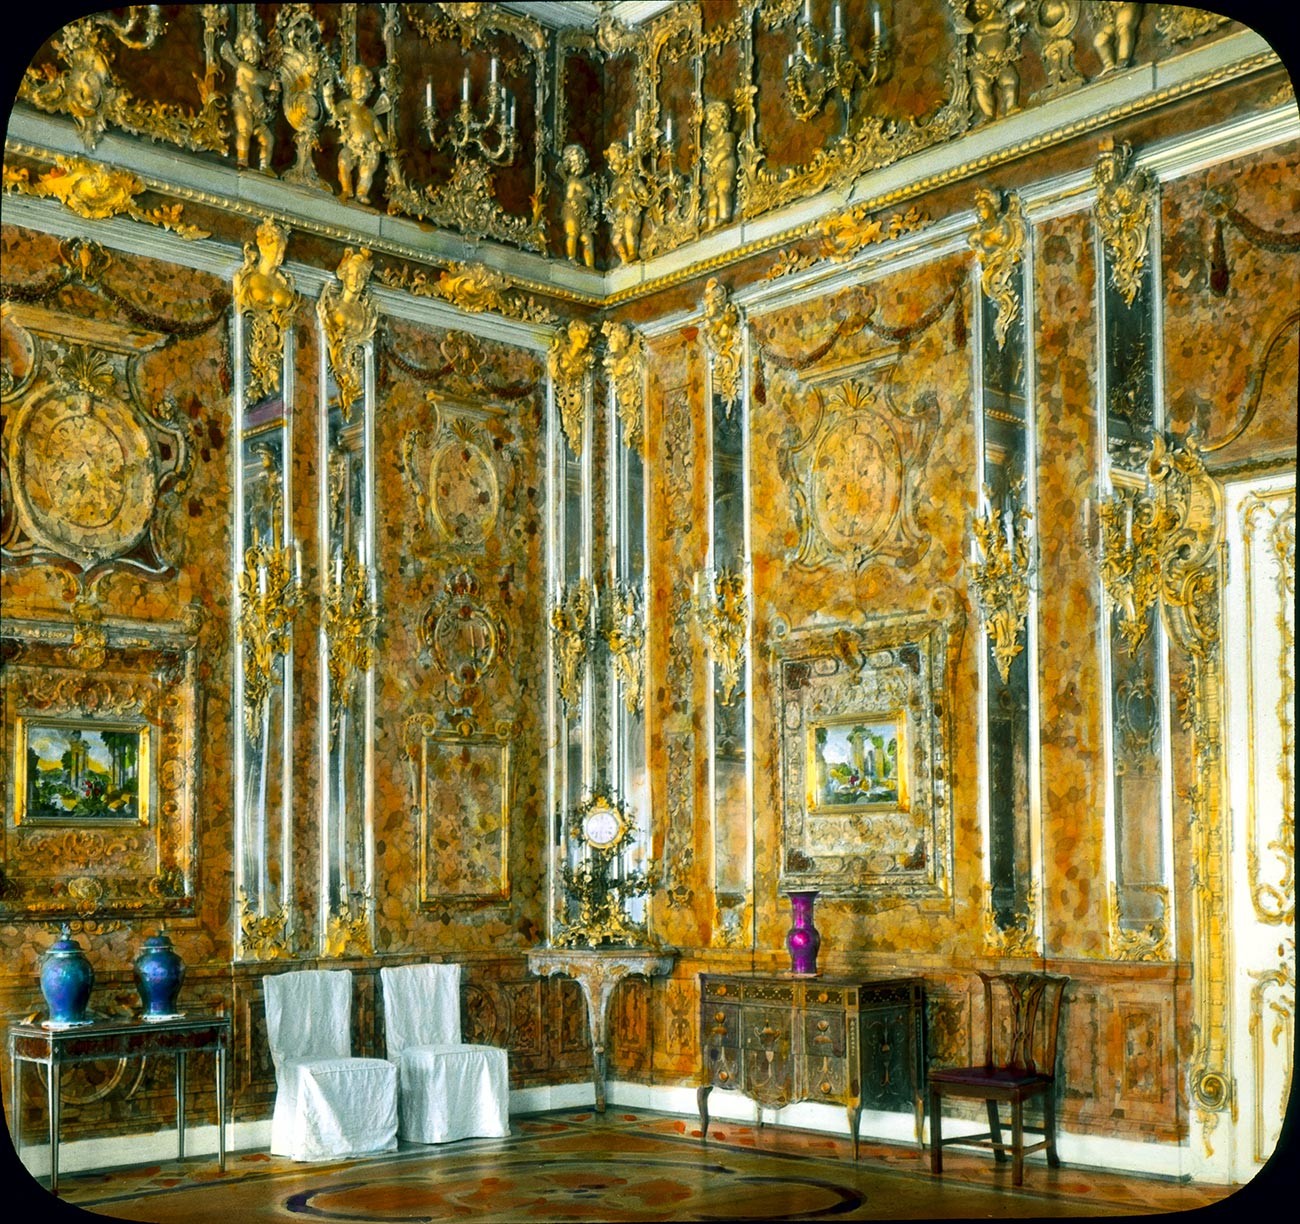 The Amber Room before the war, 1930s